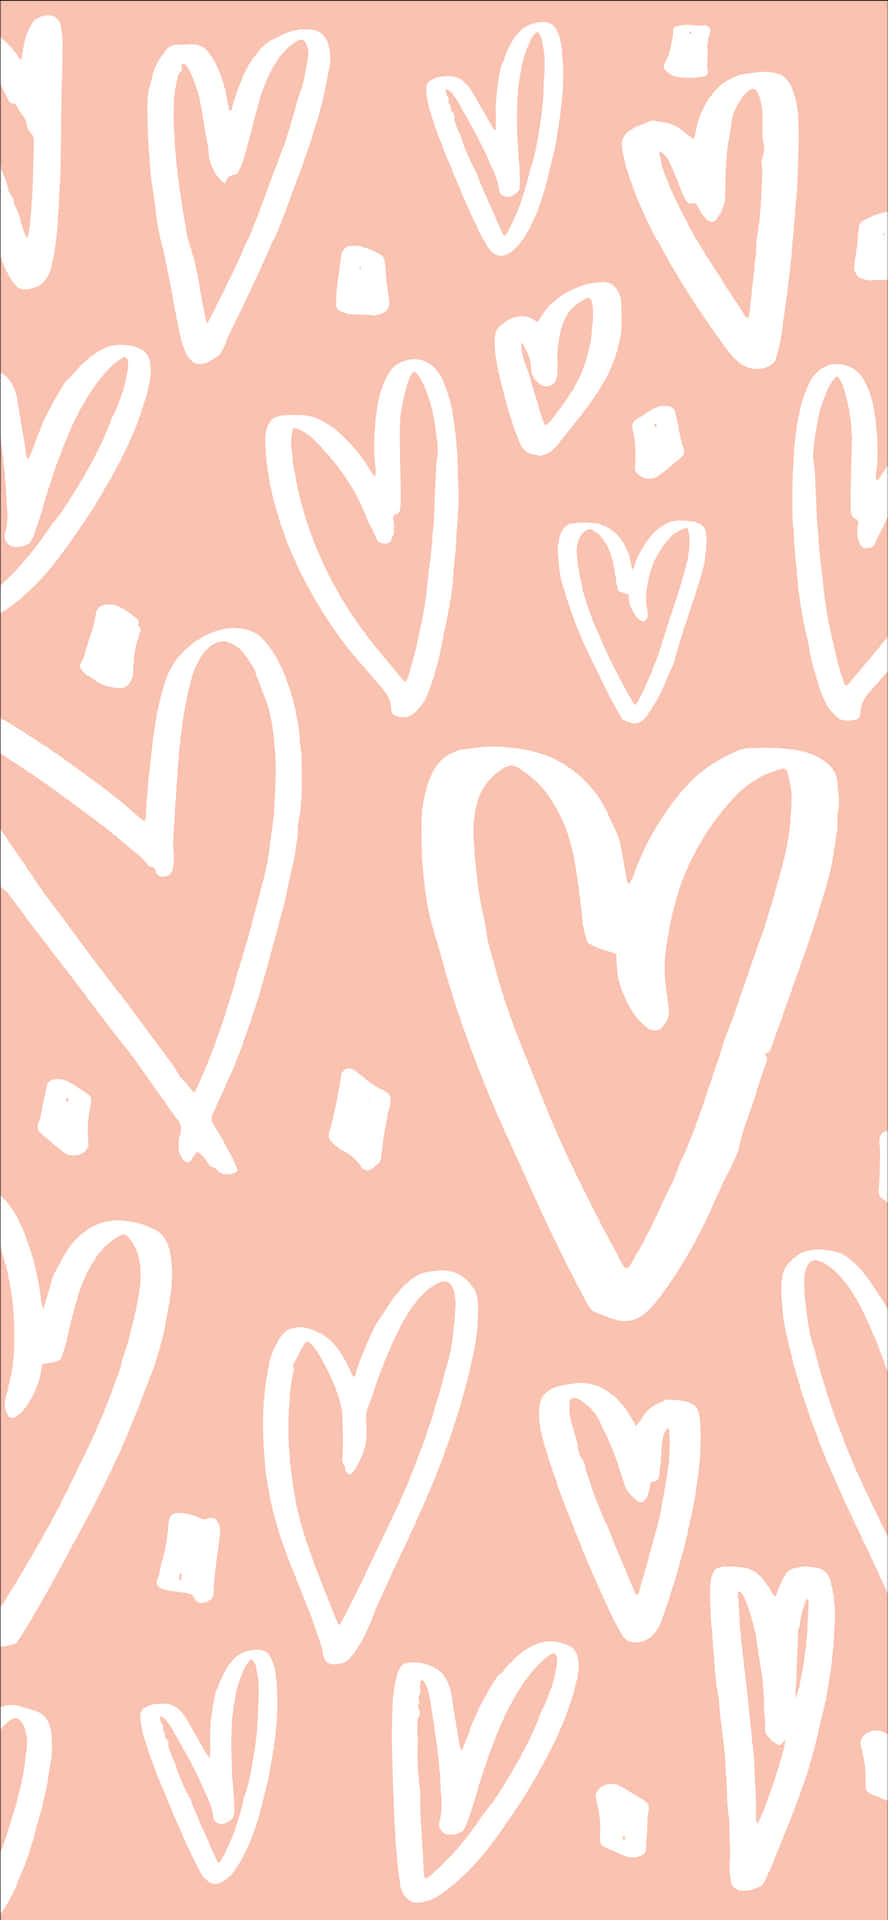 Spread the love and power up your phone with a Valentines Day theme! Wallpaper